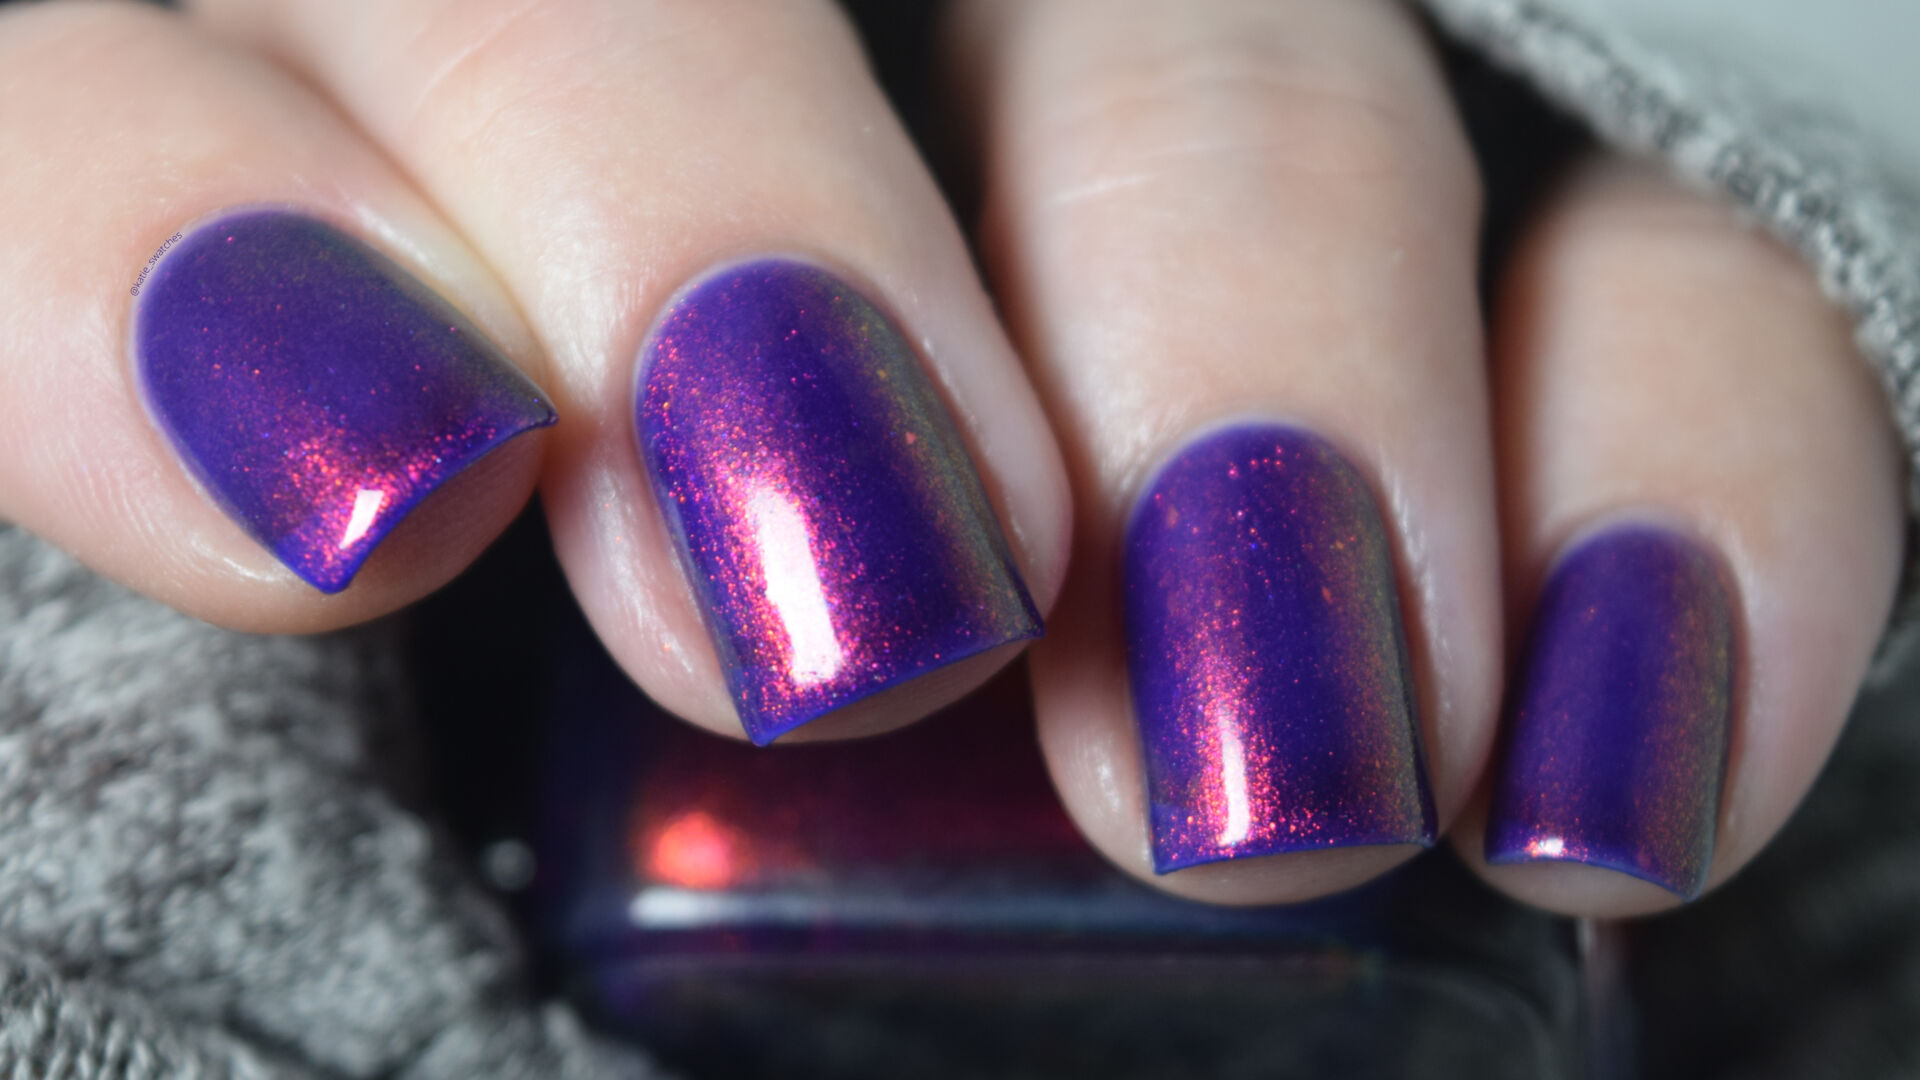 DRK Nails - Purifire nail polish swatch. Violet purple jelly nail polish with aurora shimmer. Polish Pickup August 2021 exclusive